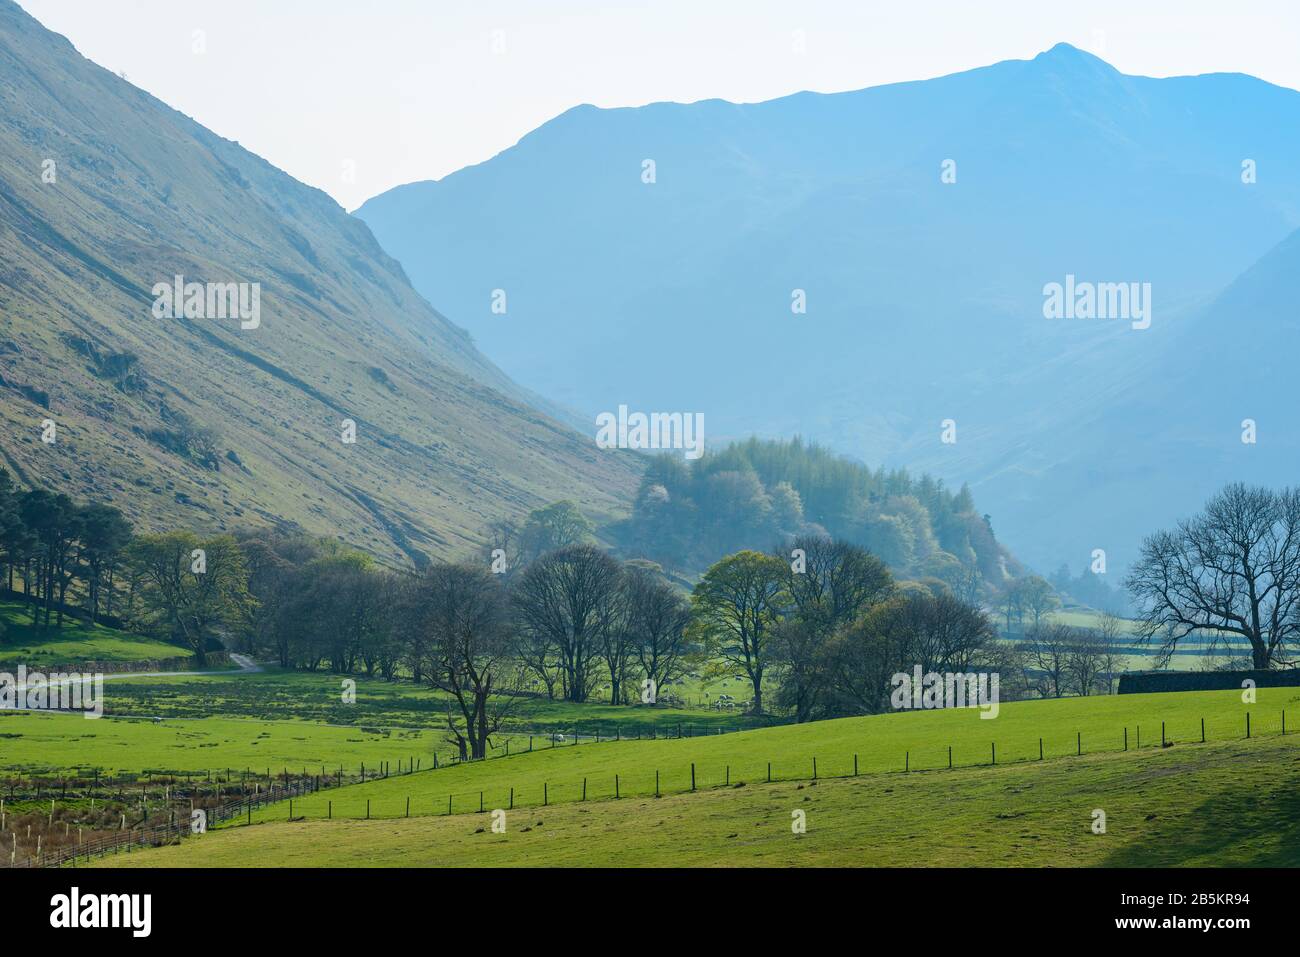 Sheep grazing on bright green grass during lambing season on the lower slopes of Birkhouse Moor near Glenridding, Lake District, Cumbria, UK, in April. Stock Photo